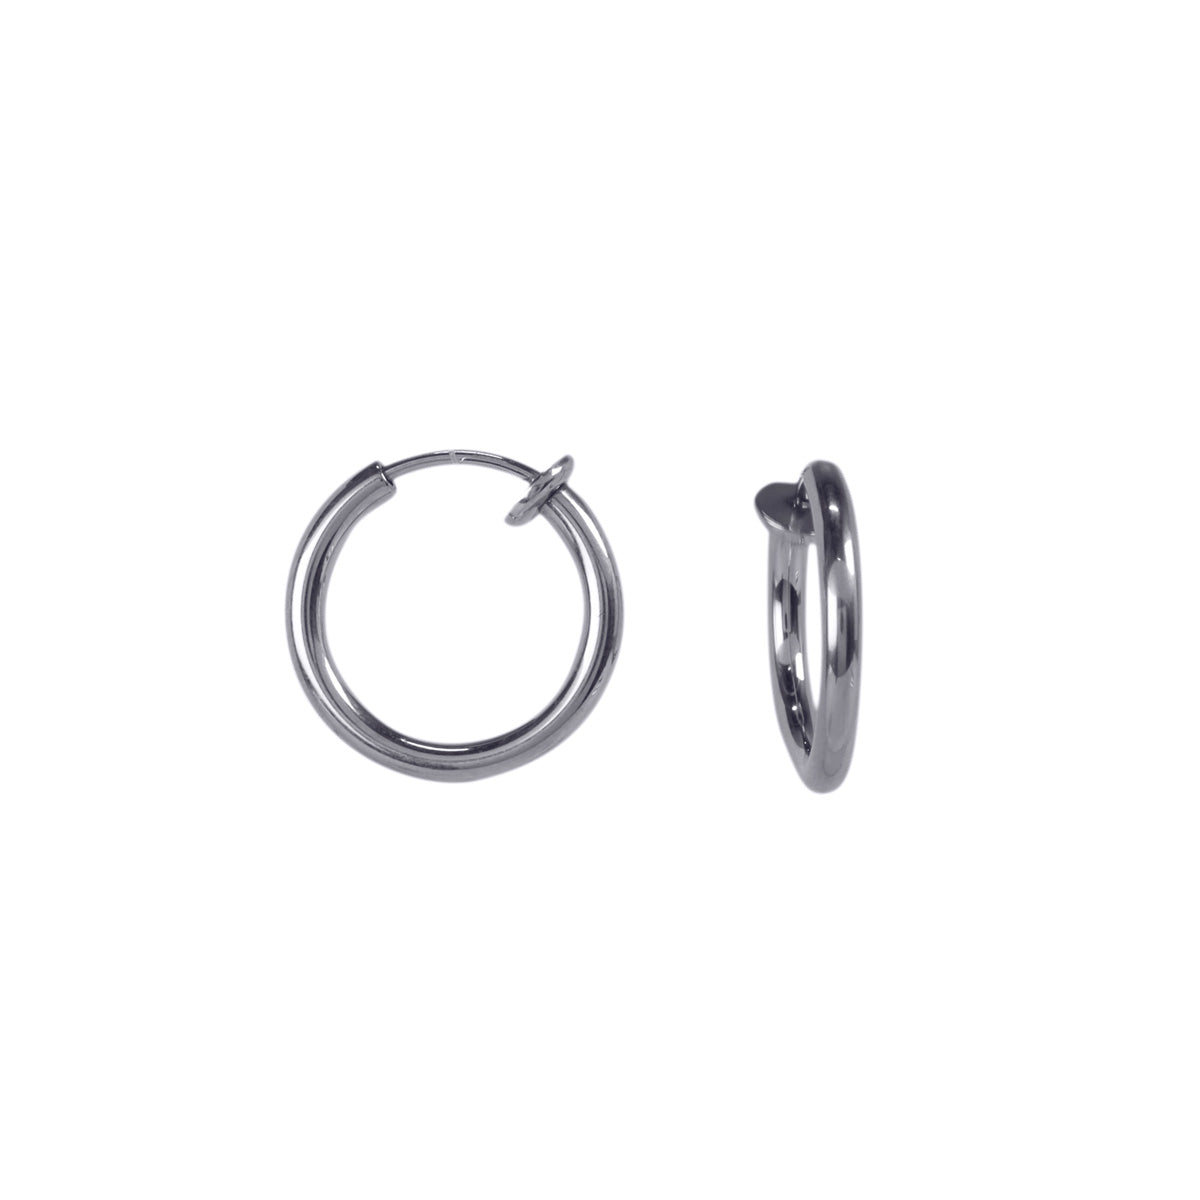 Spring-loaded earring with fine ring 12mm 2pcs (Steel 316L)